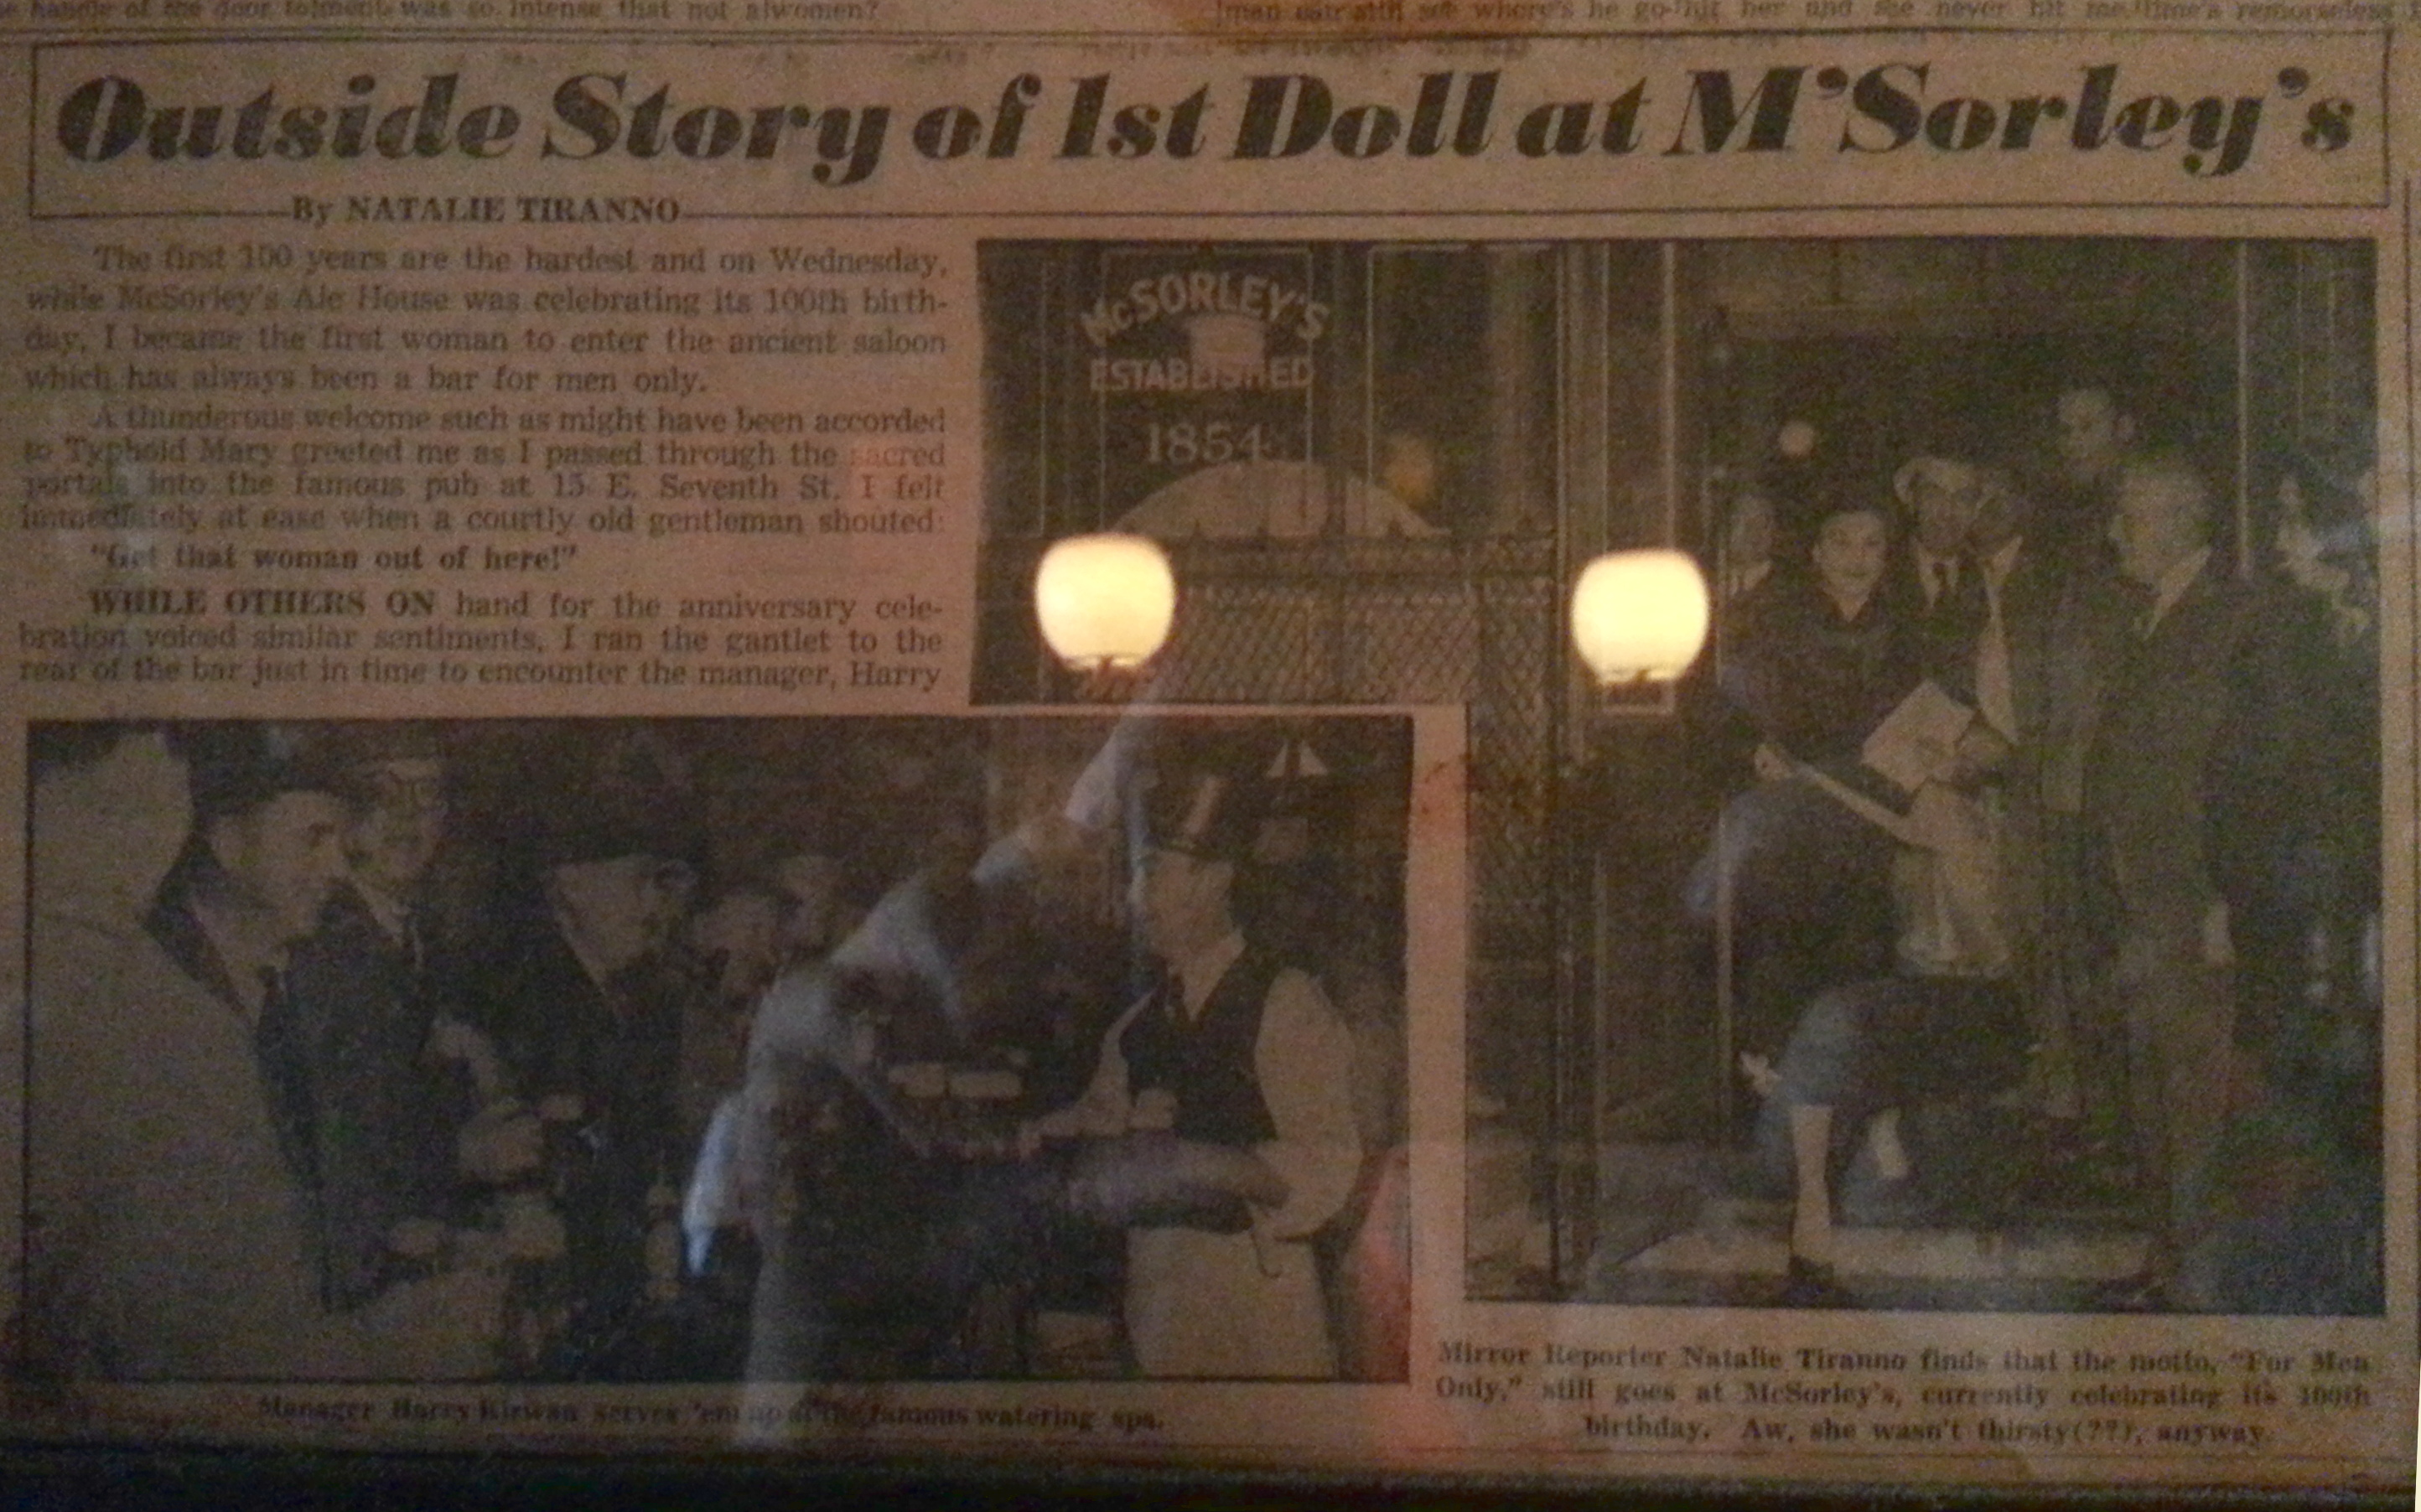 Article about the first woman in McSorley's